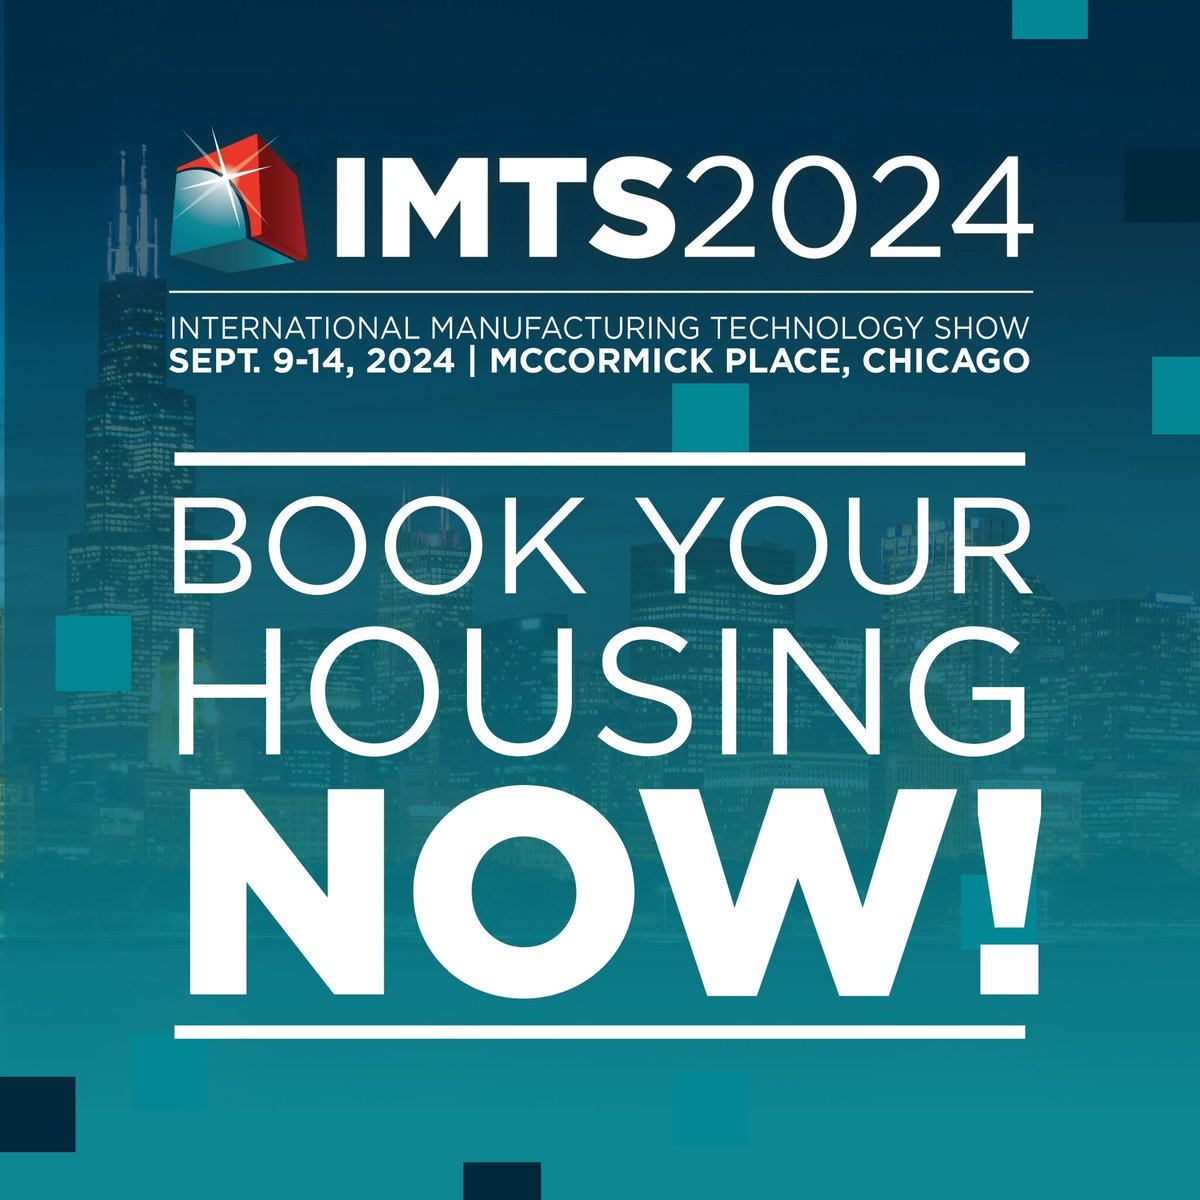 We are now less than 6 months away from #IMTS2024, so we want to remind you to book your housing now! Our team can find you the best deal for the week of the show and make sure you can check one more thing off of your list! Find more info or book here: bit.ly/3v9AlxA